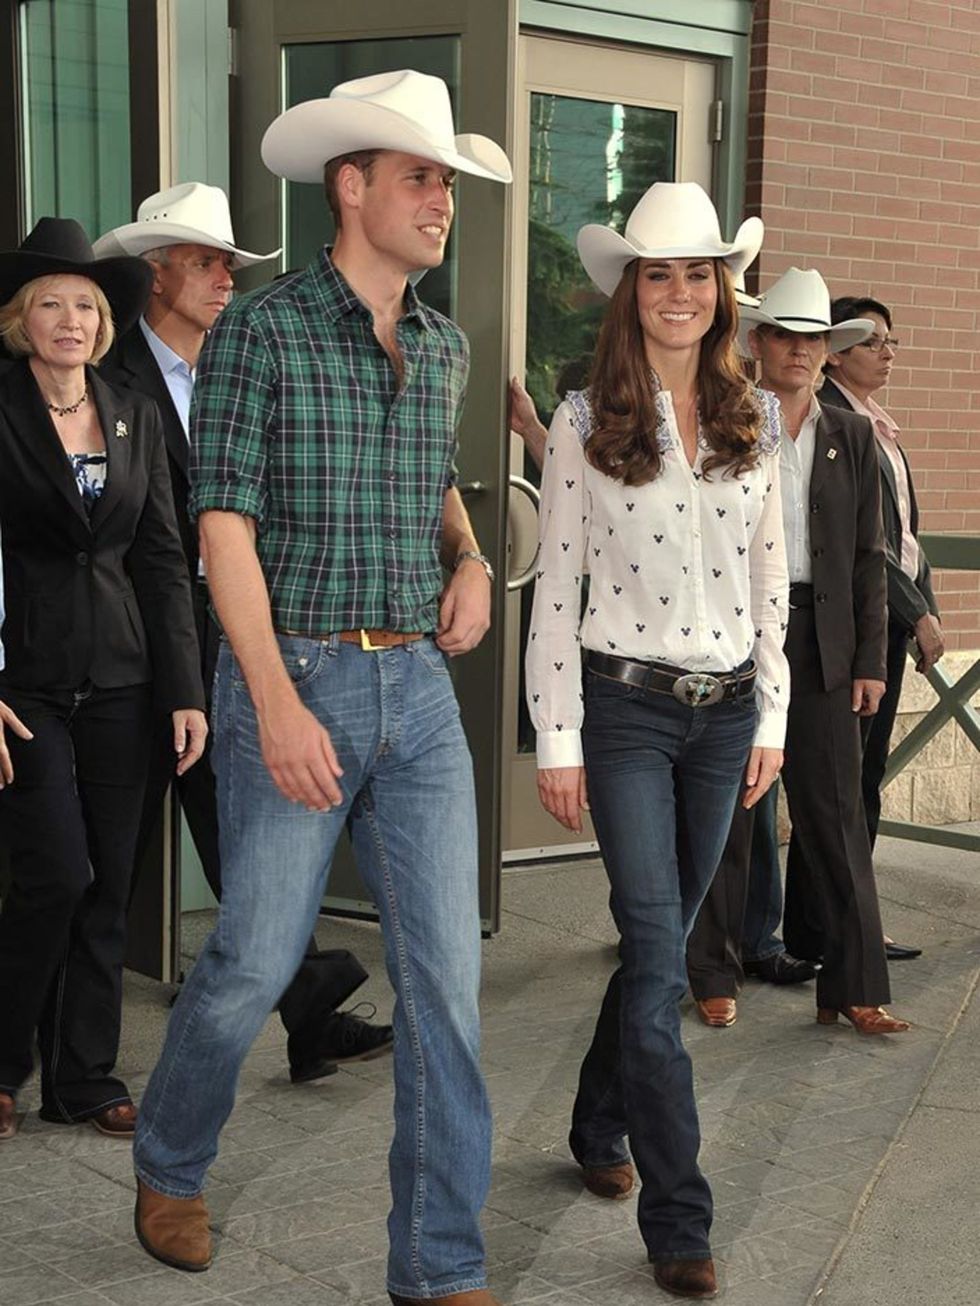 <p>Prince William and Kate Middleton, 2011. </p>

<p>When in Texas</p>